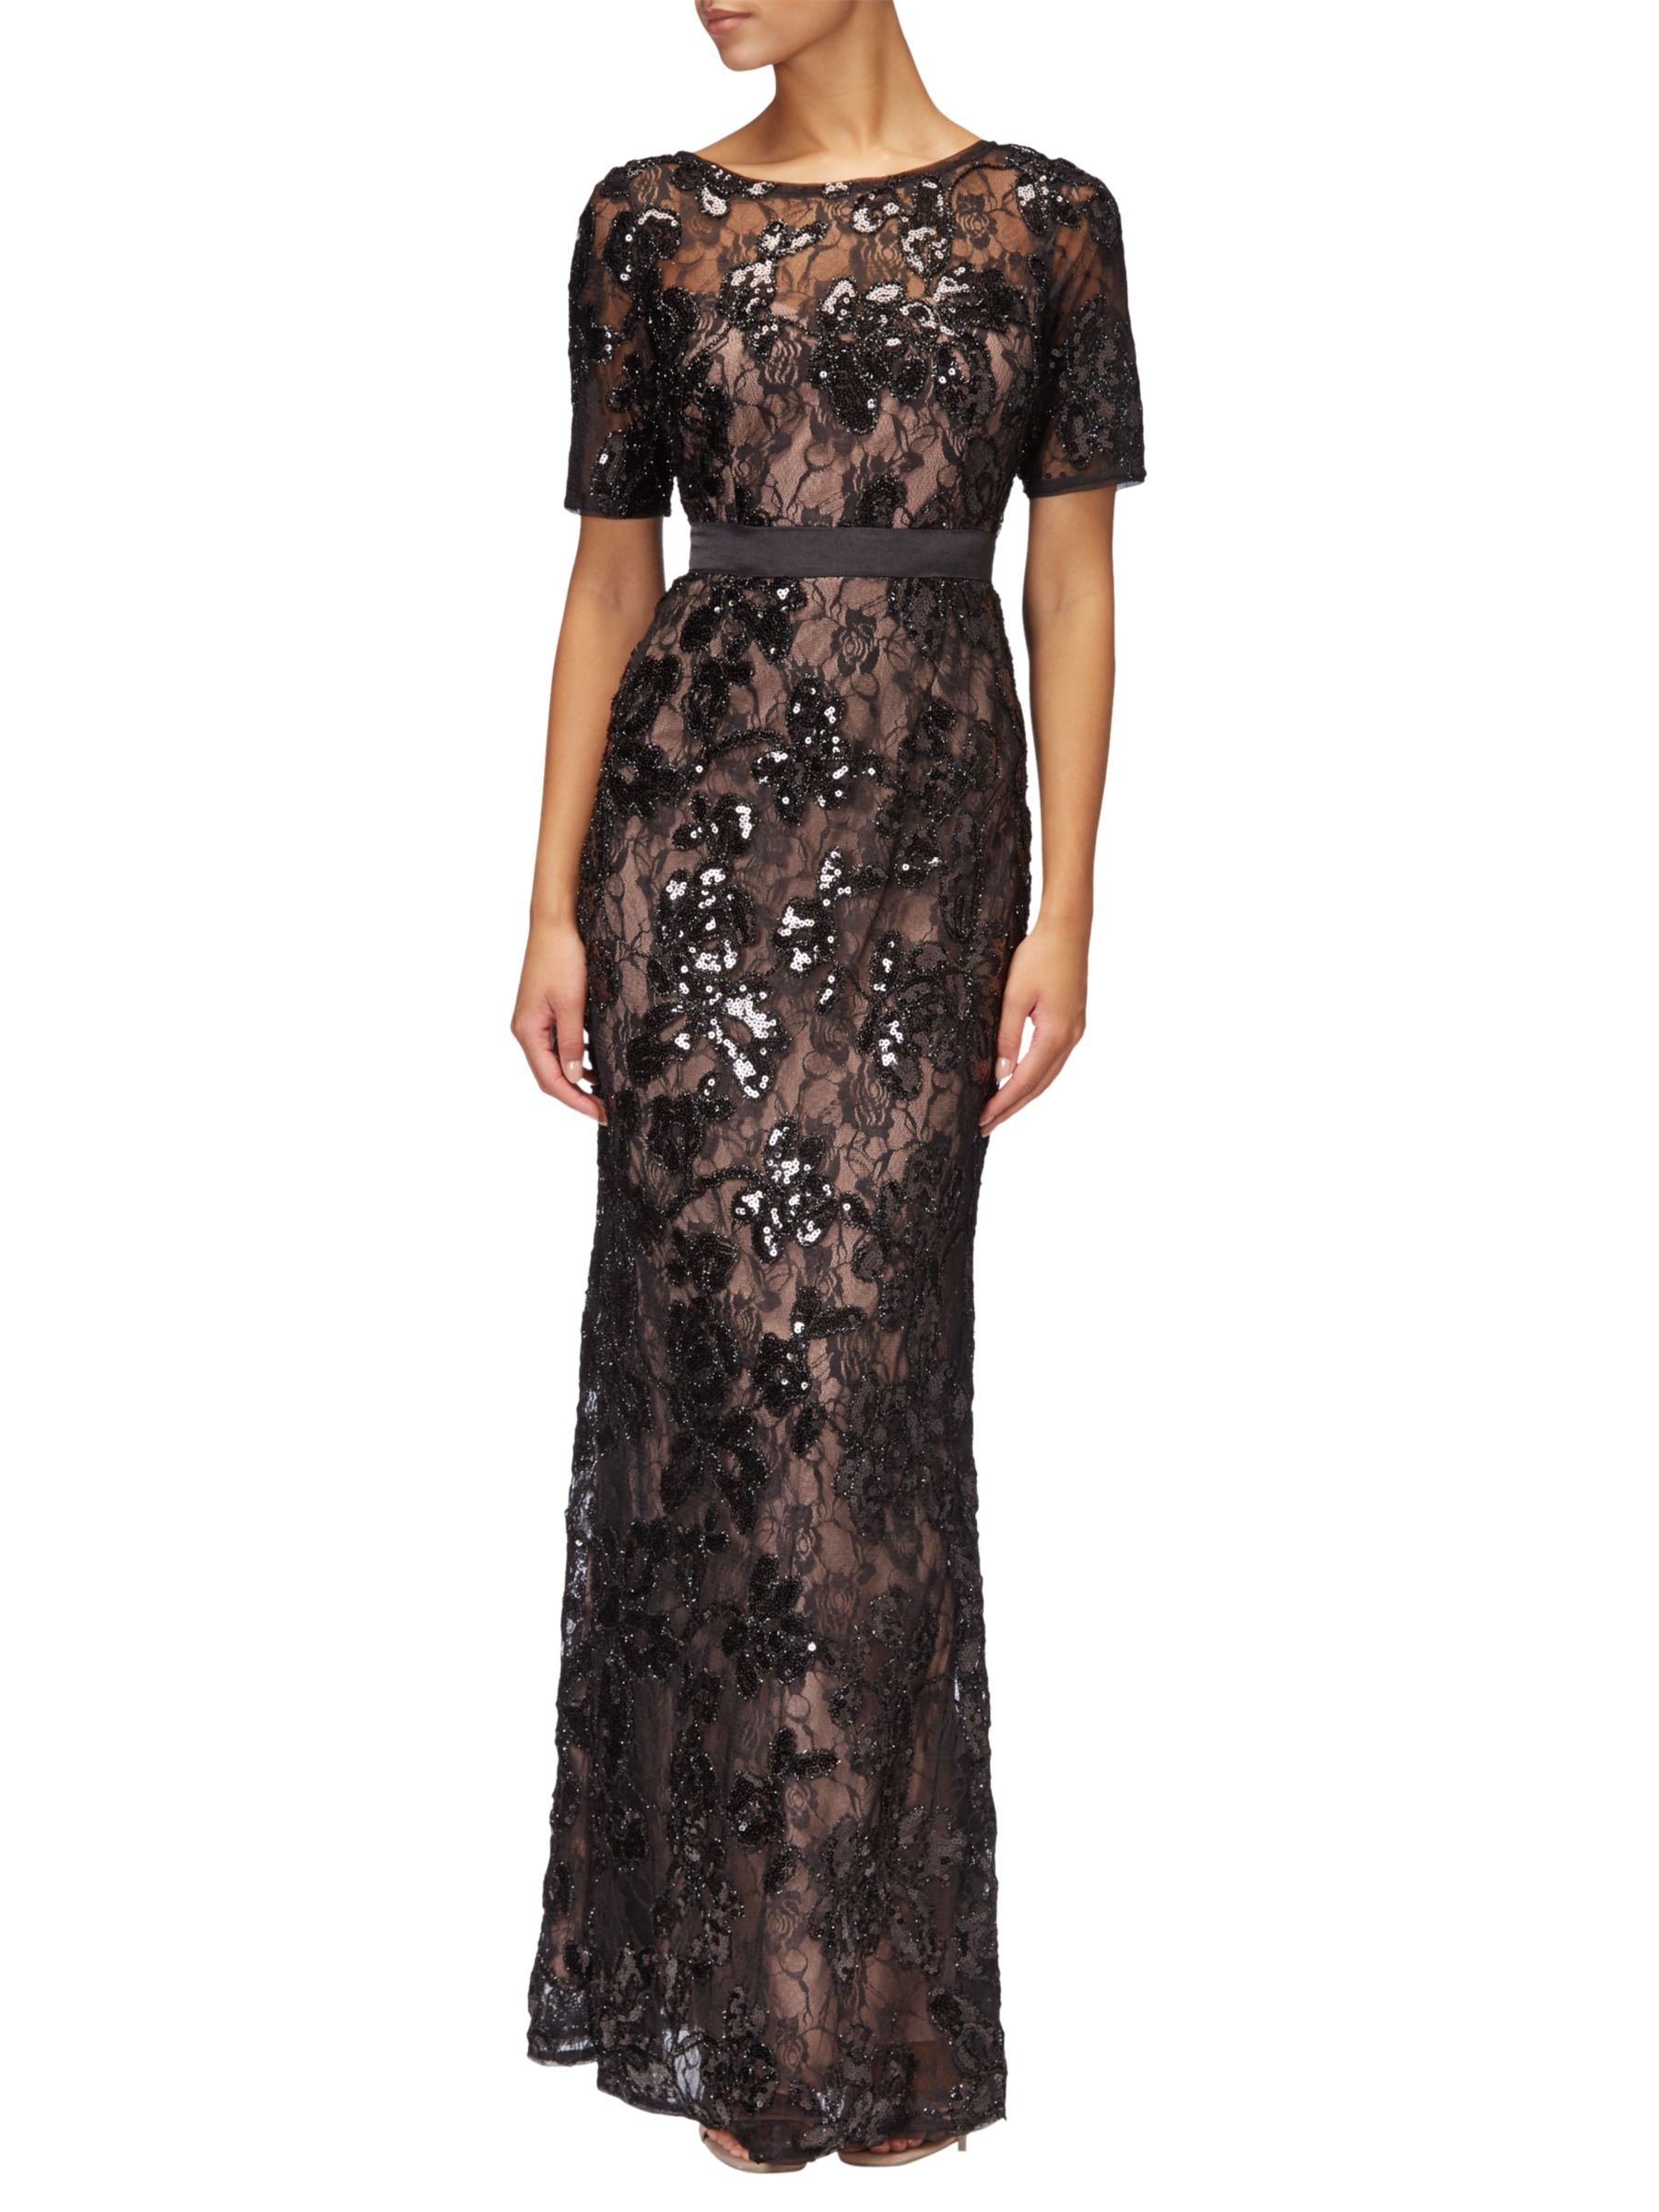 Adrianna Papell Sequined Lace Long Dress, Black/Nude